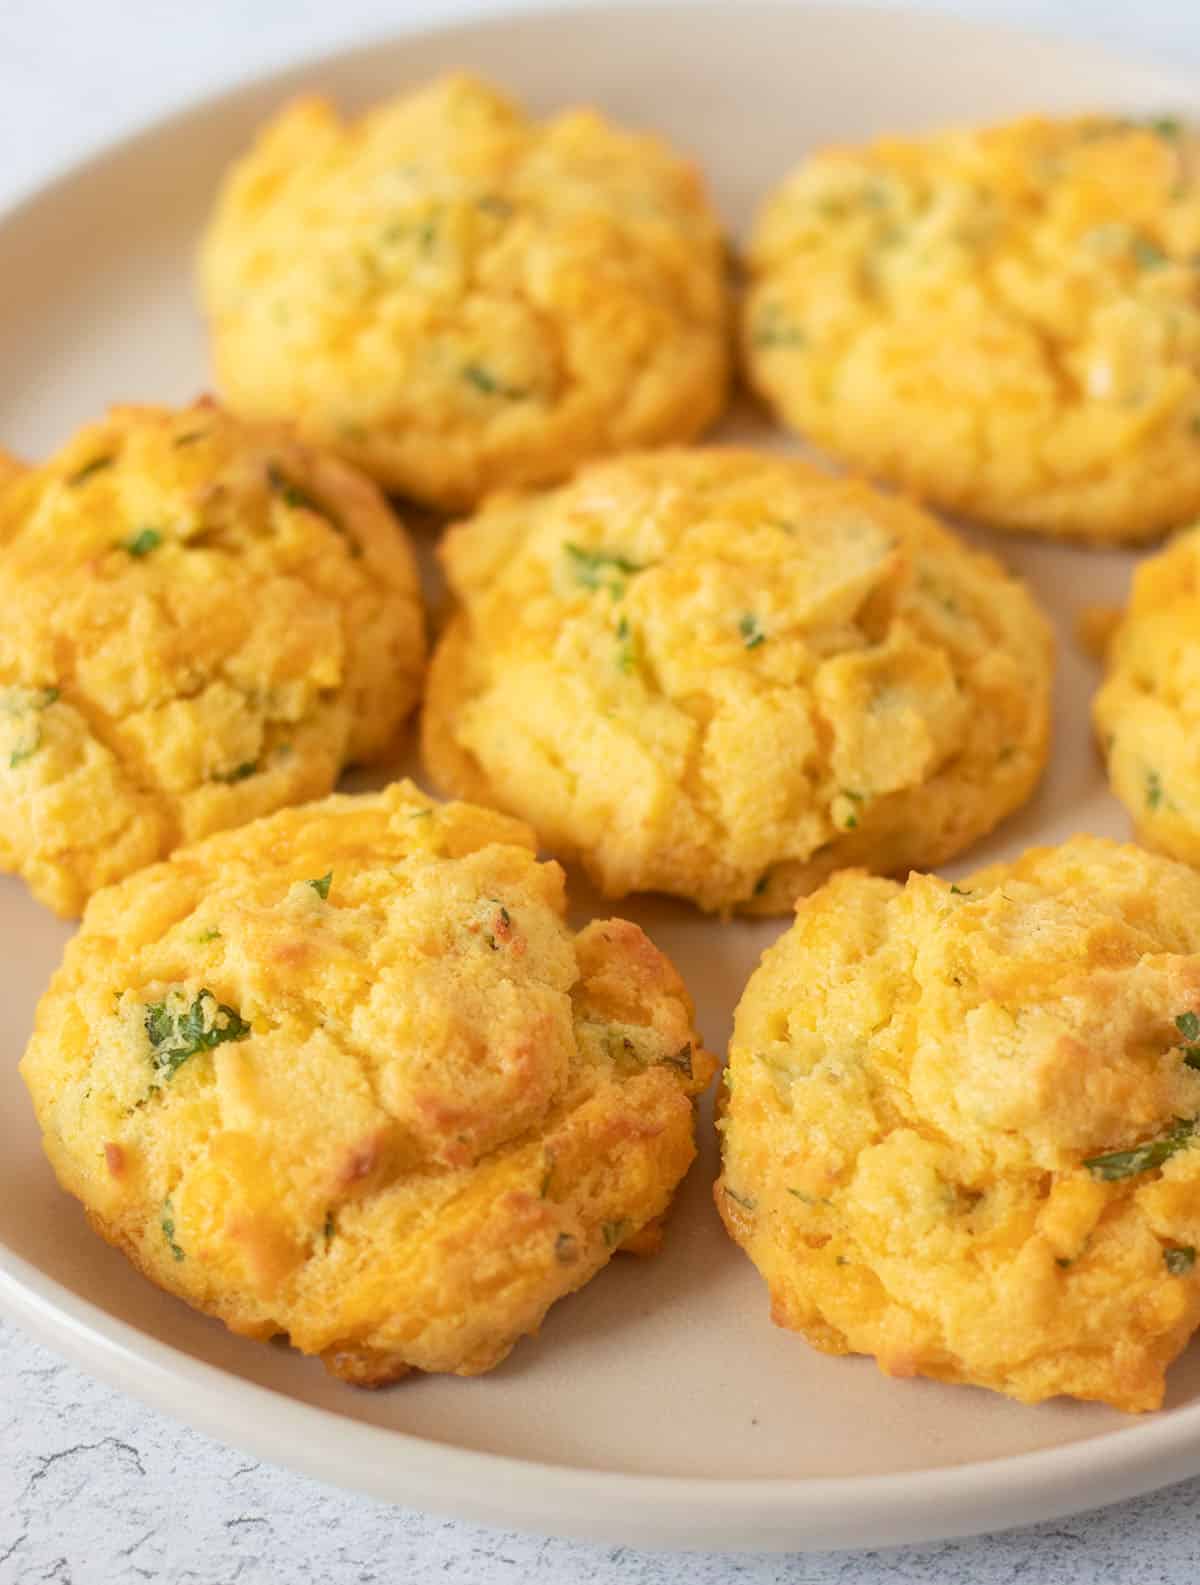 Keto coconut flour biscuits with cheddar and parsley served on a beige plate.